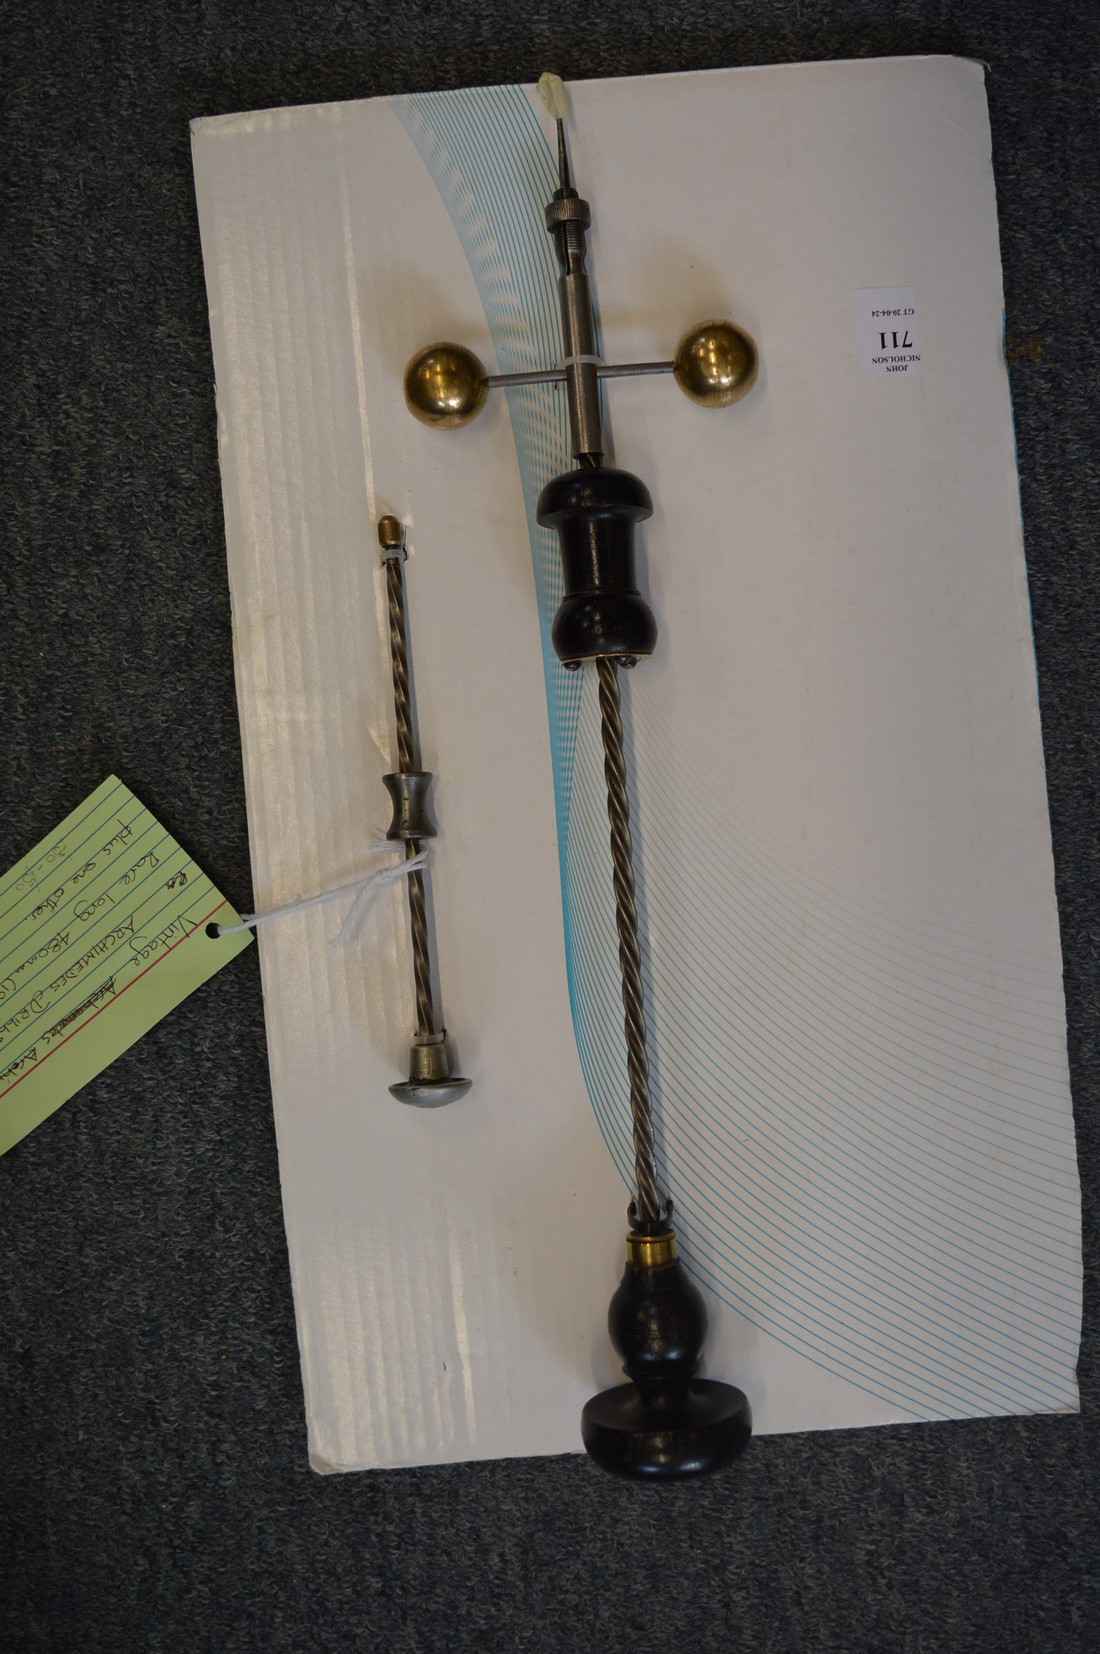 Two Archimedes drills, including a rare large version.